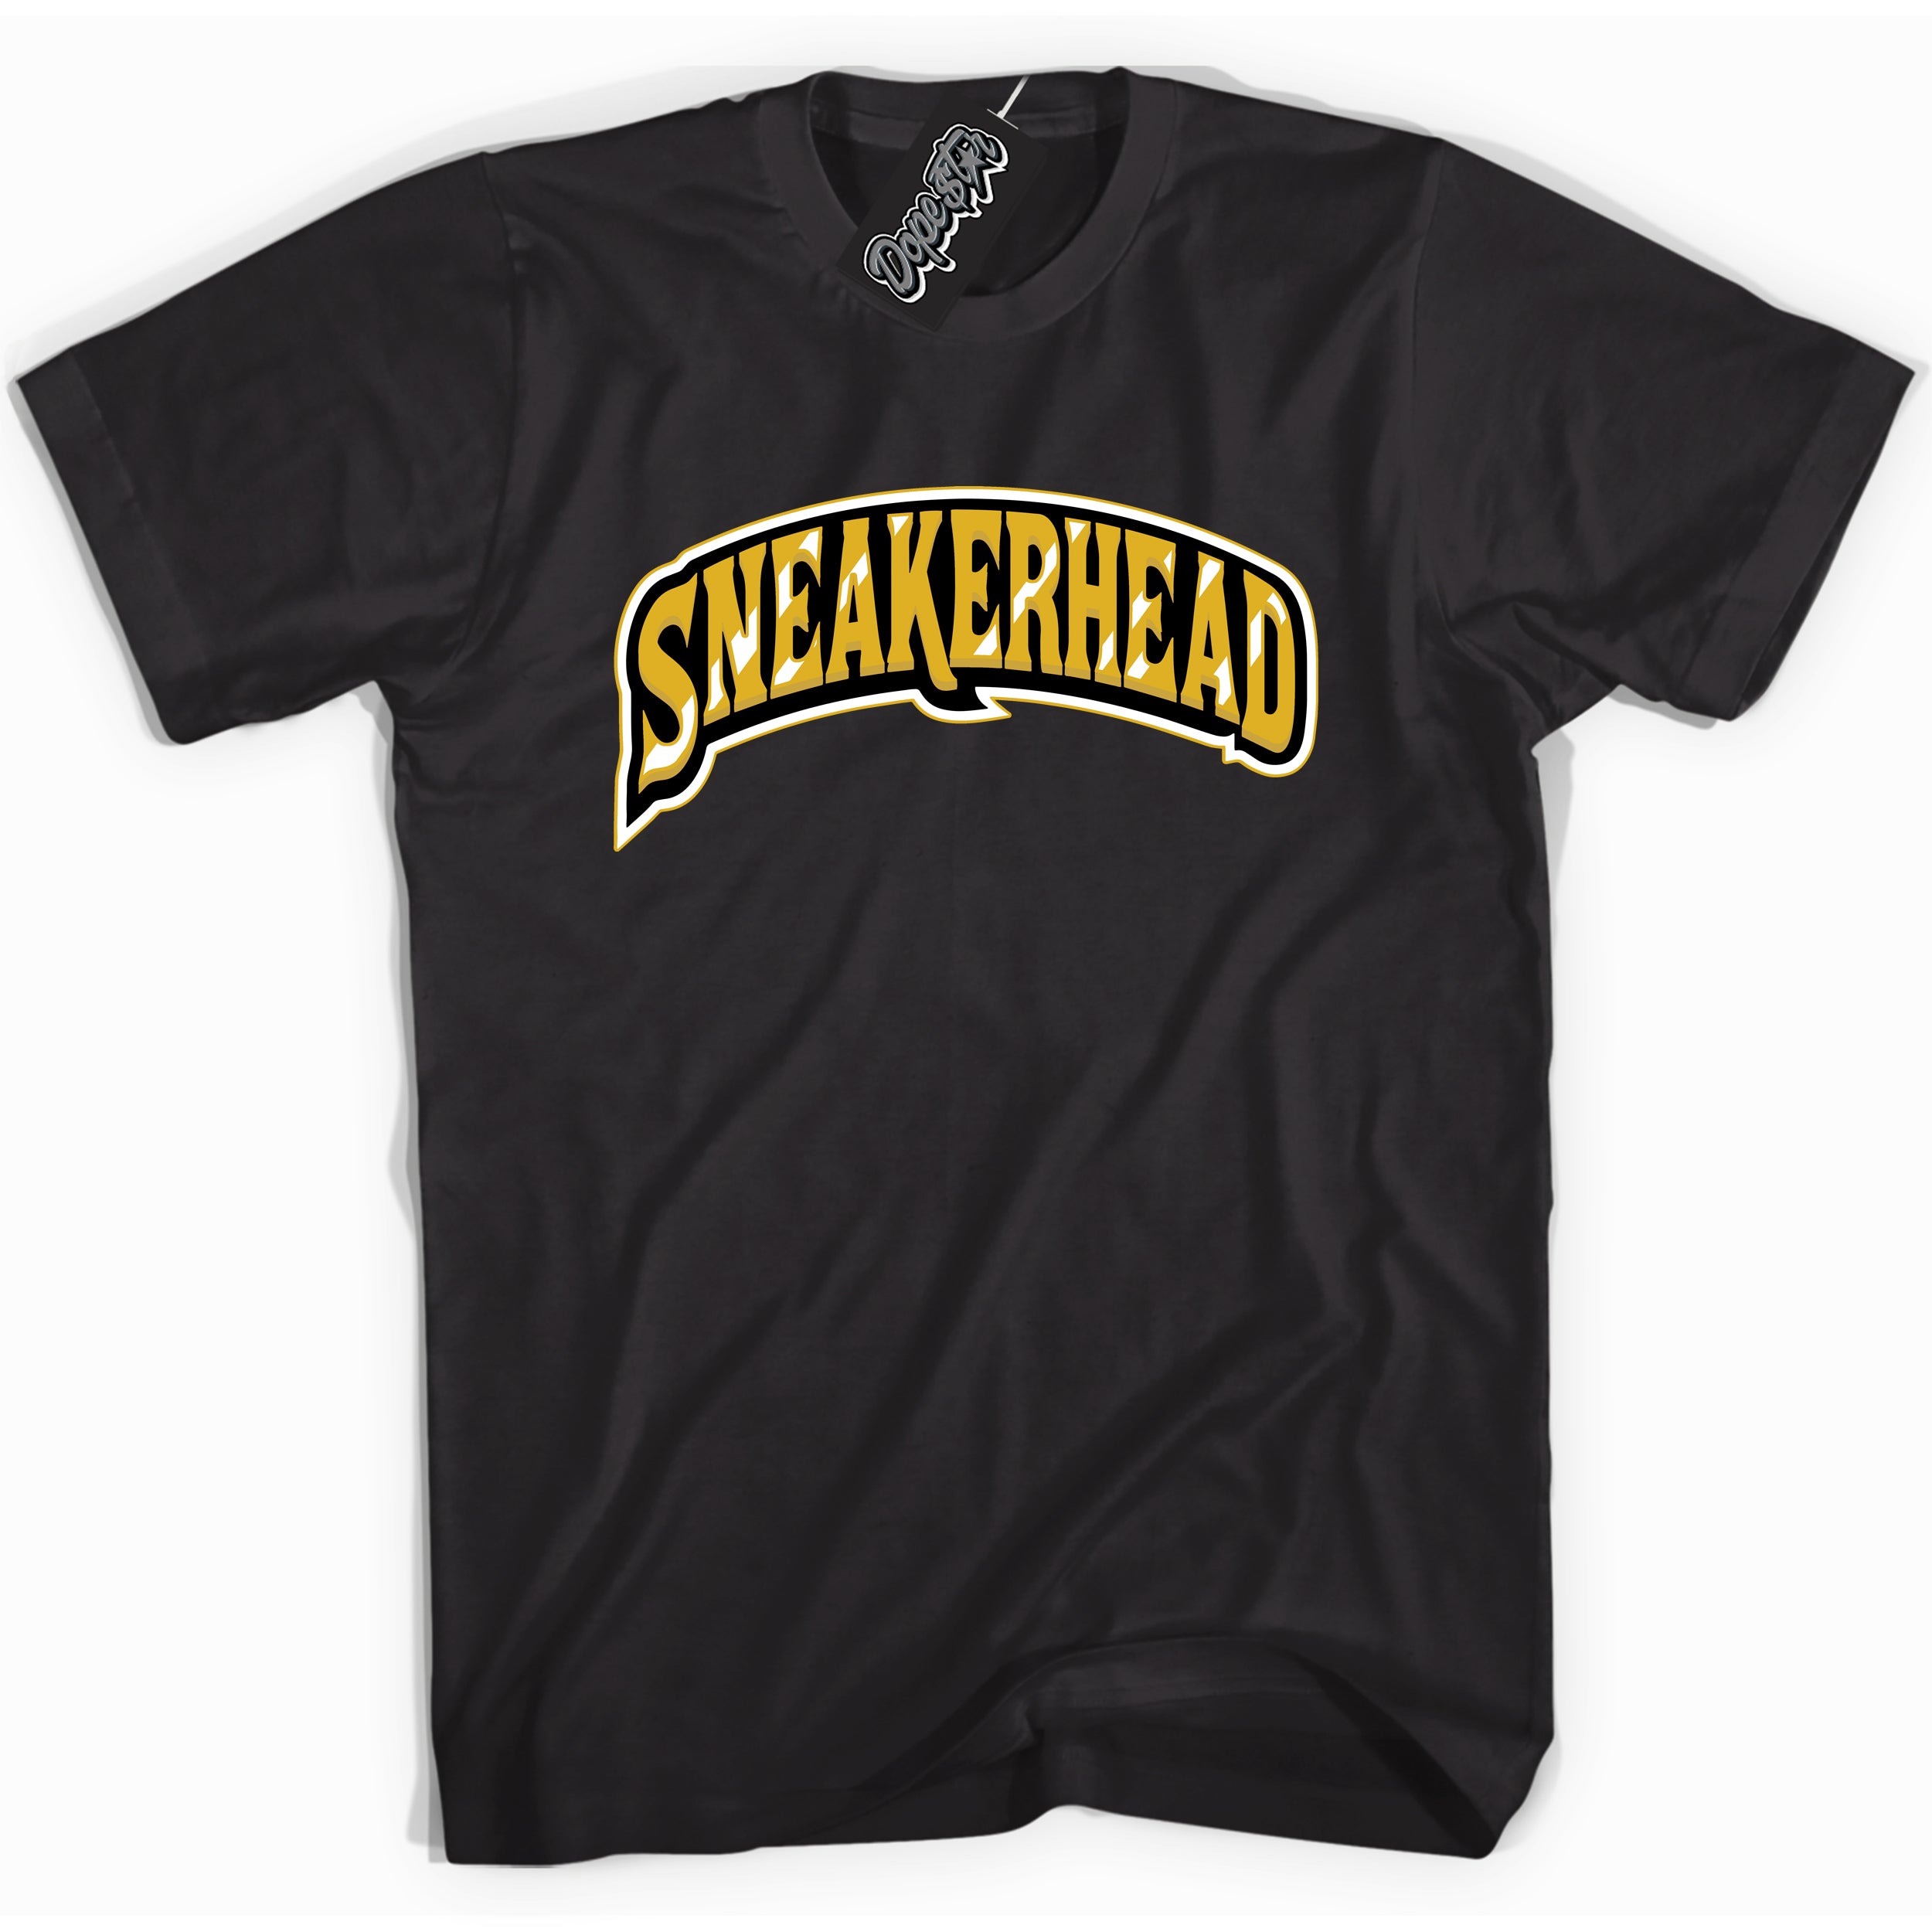 Cool Black Shirt with “ Sneakerhead ” design that perfectly matches Yellow Ochre 6s Sneakers.